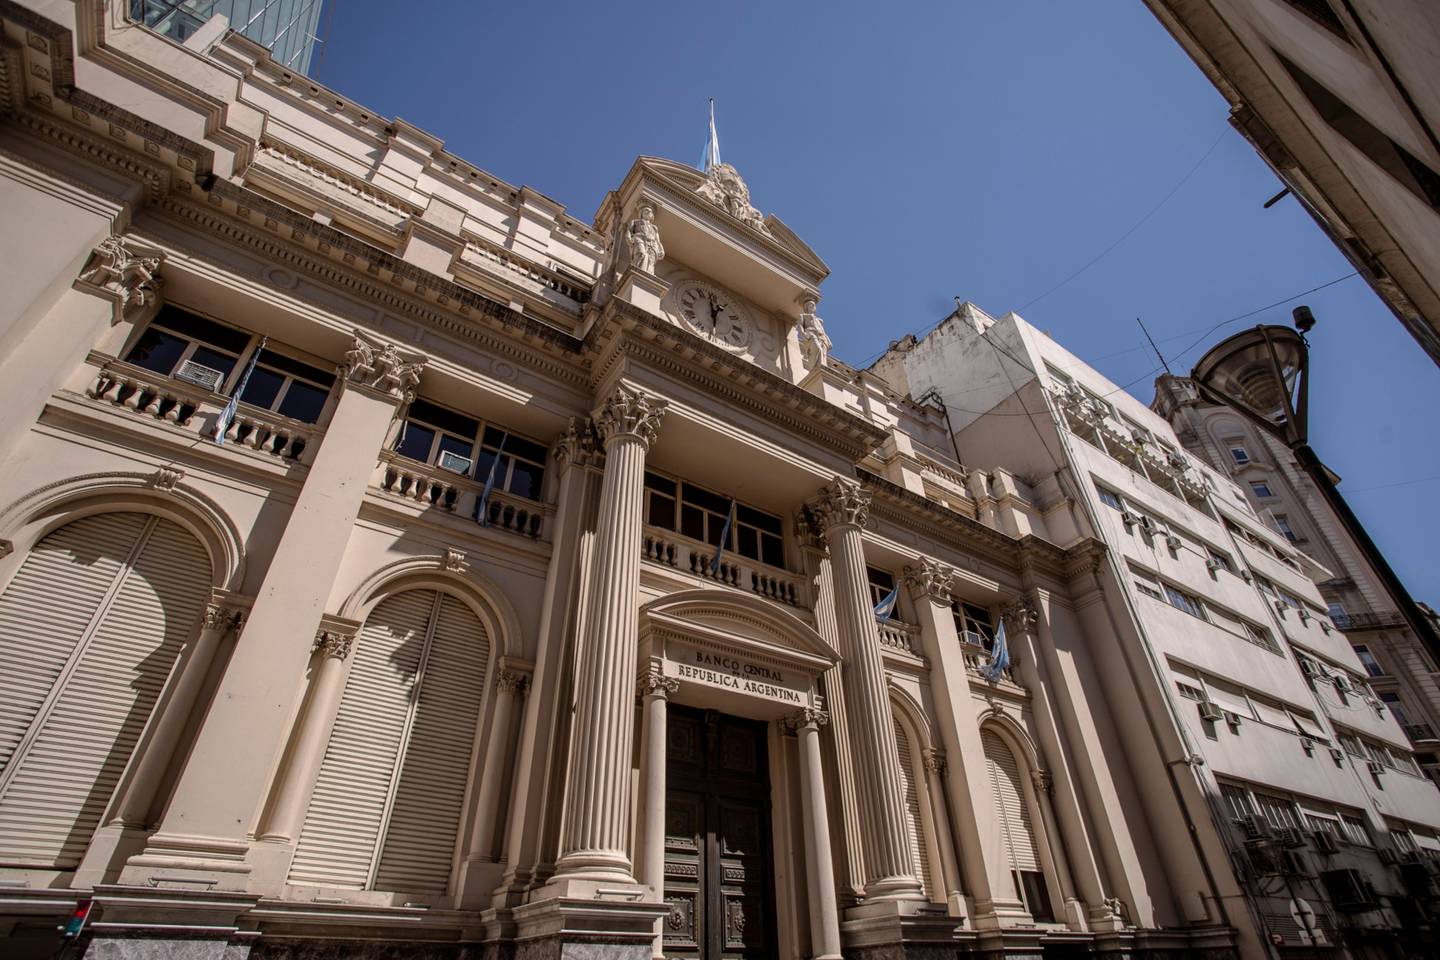 Argentina's economy capped a strong second half of growth as it emerged from a long recession last year ahead of an expected new deal in the coming weeks with the International Monetary Fund